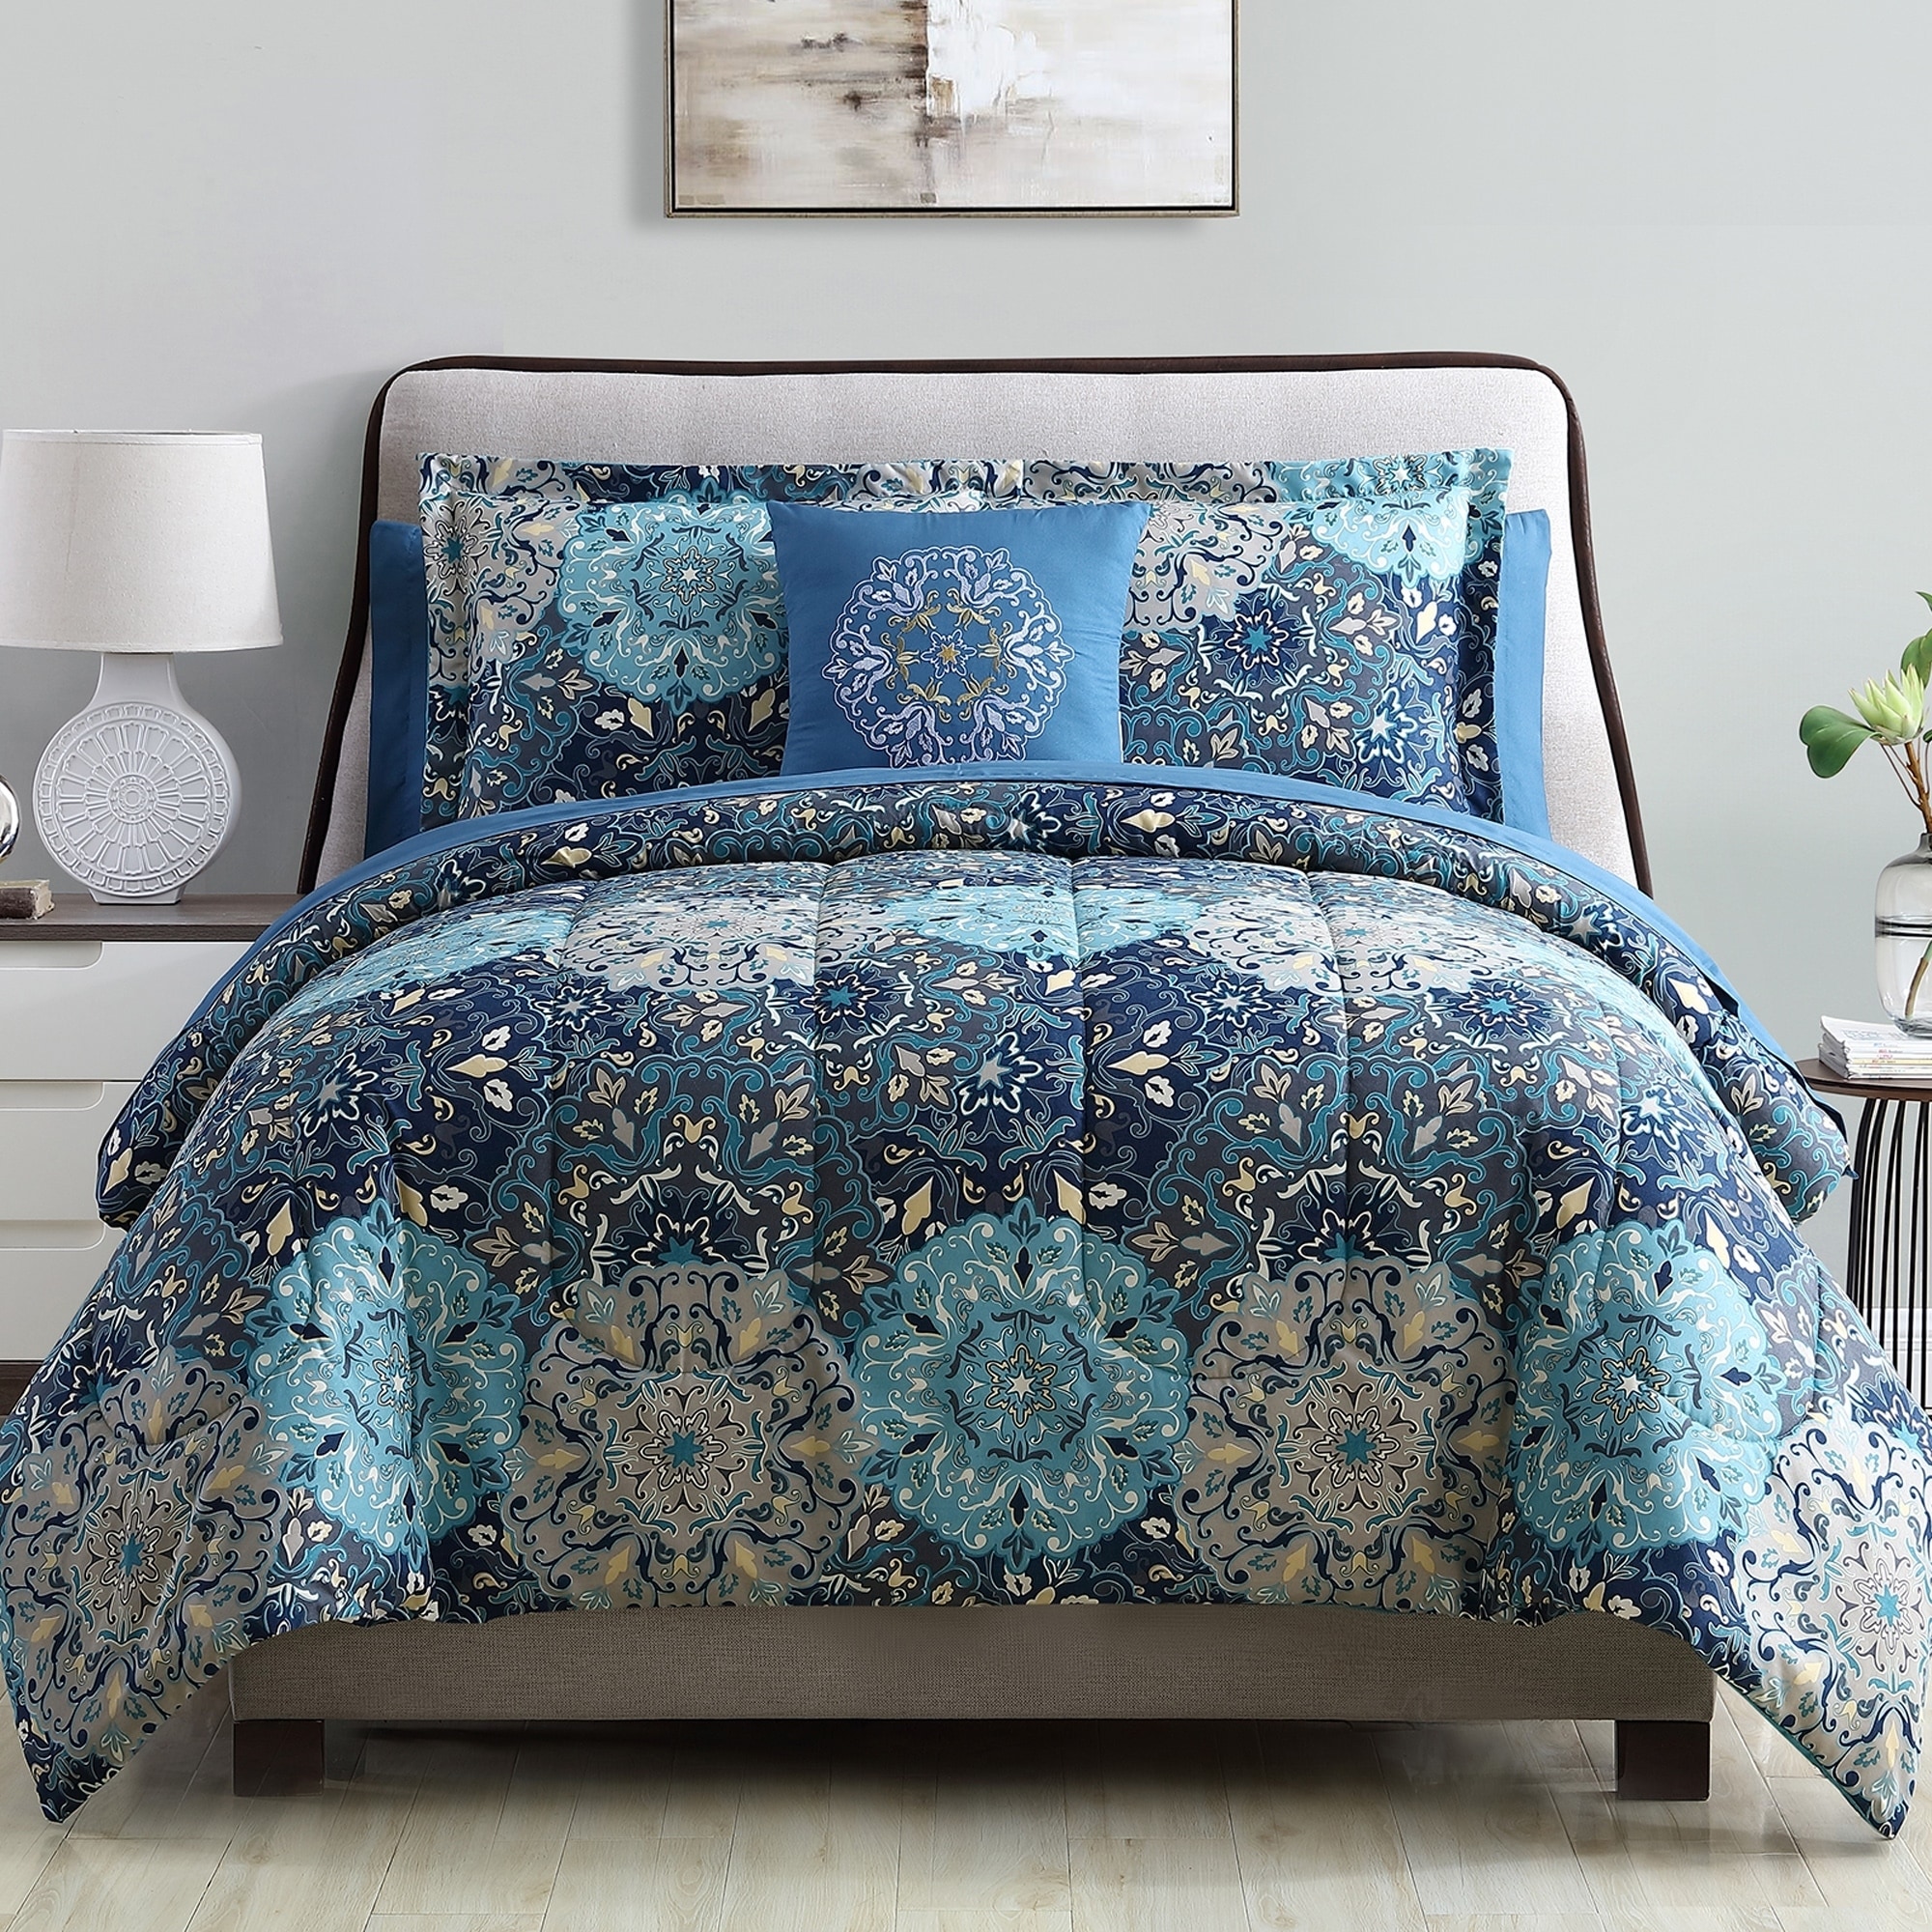 https://ak1.ostkcdn.com/images/products/14655455/Amraupur-Overseas-Granada-8-Piece-Printed-Reversible-Comforter-Complete-Bed-Set-5e709815-4234-4045-91f2-deaa2f5dc48f.jpg